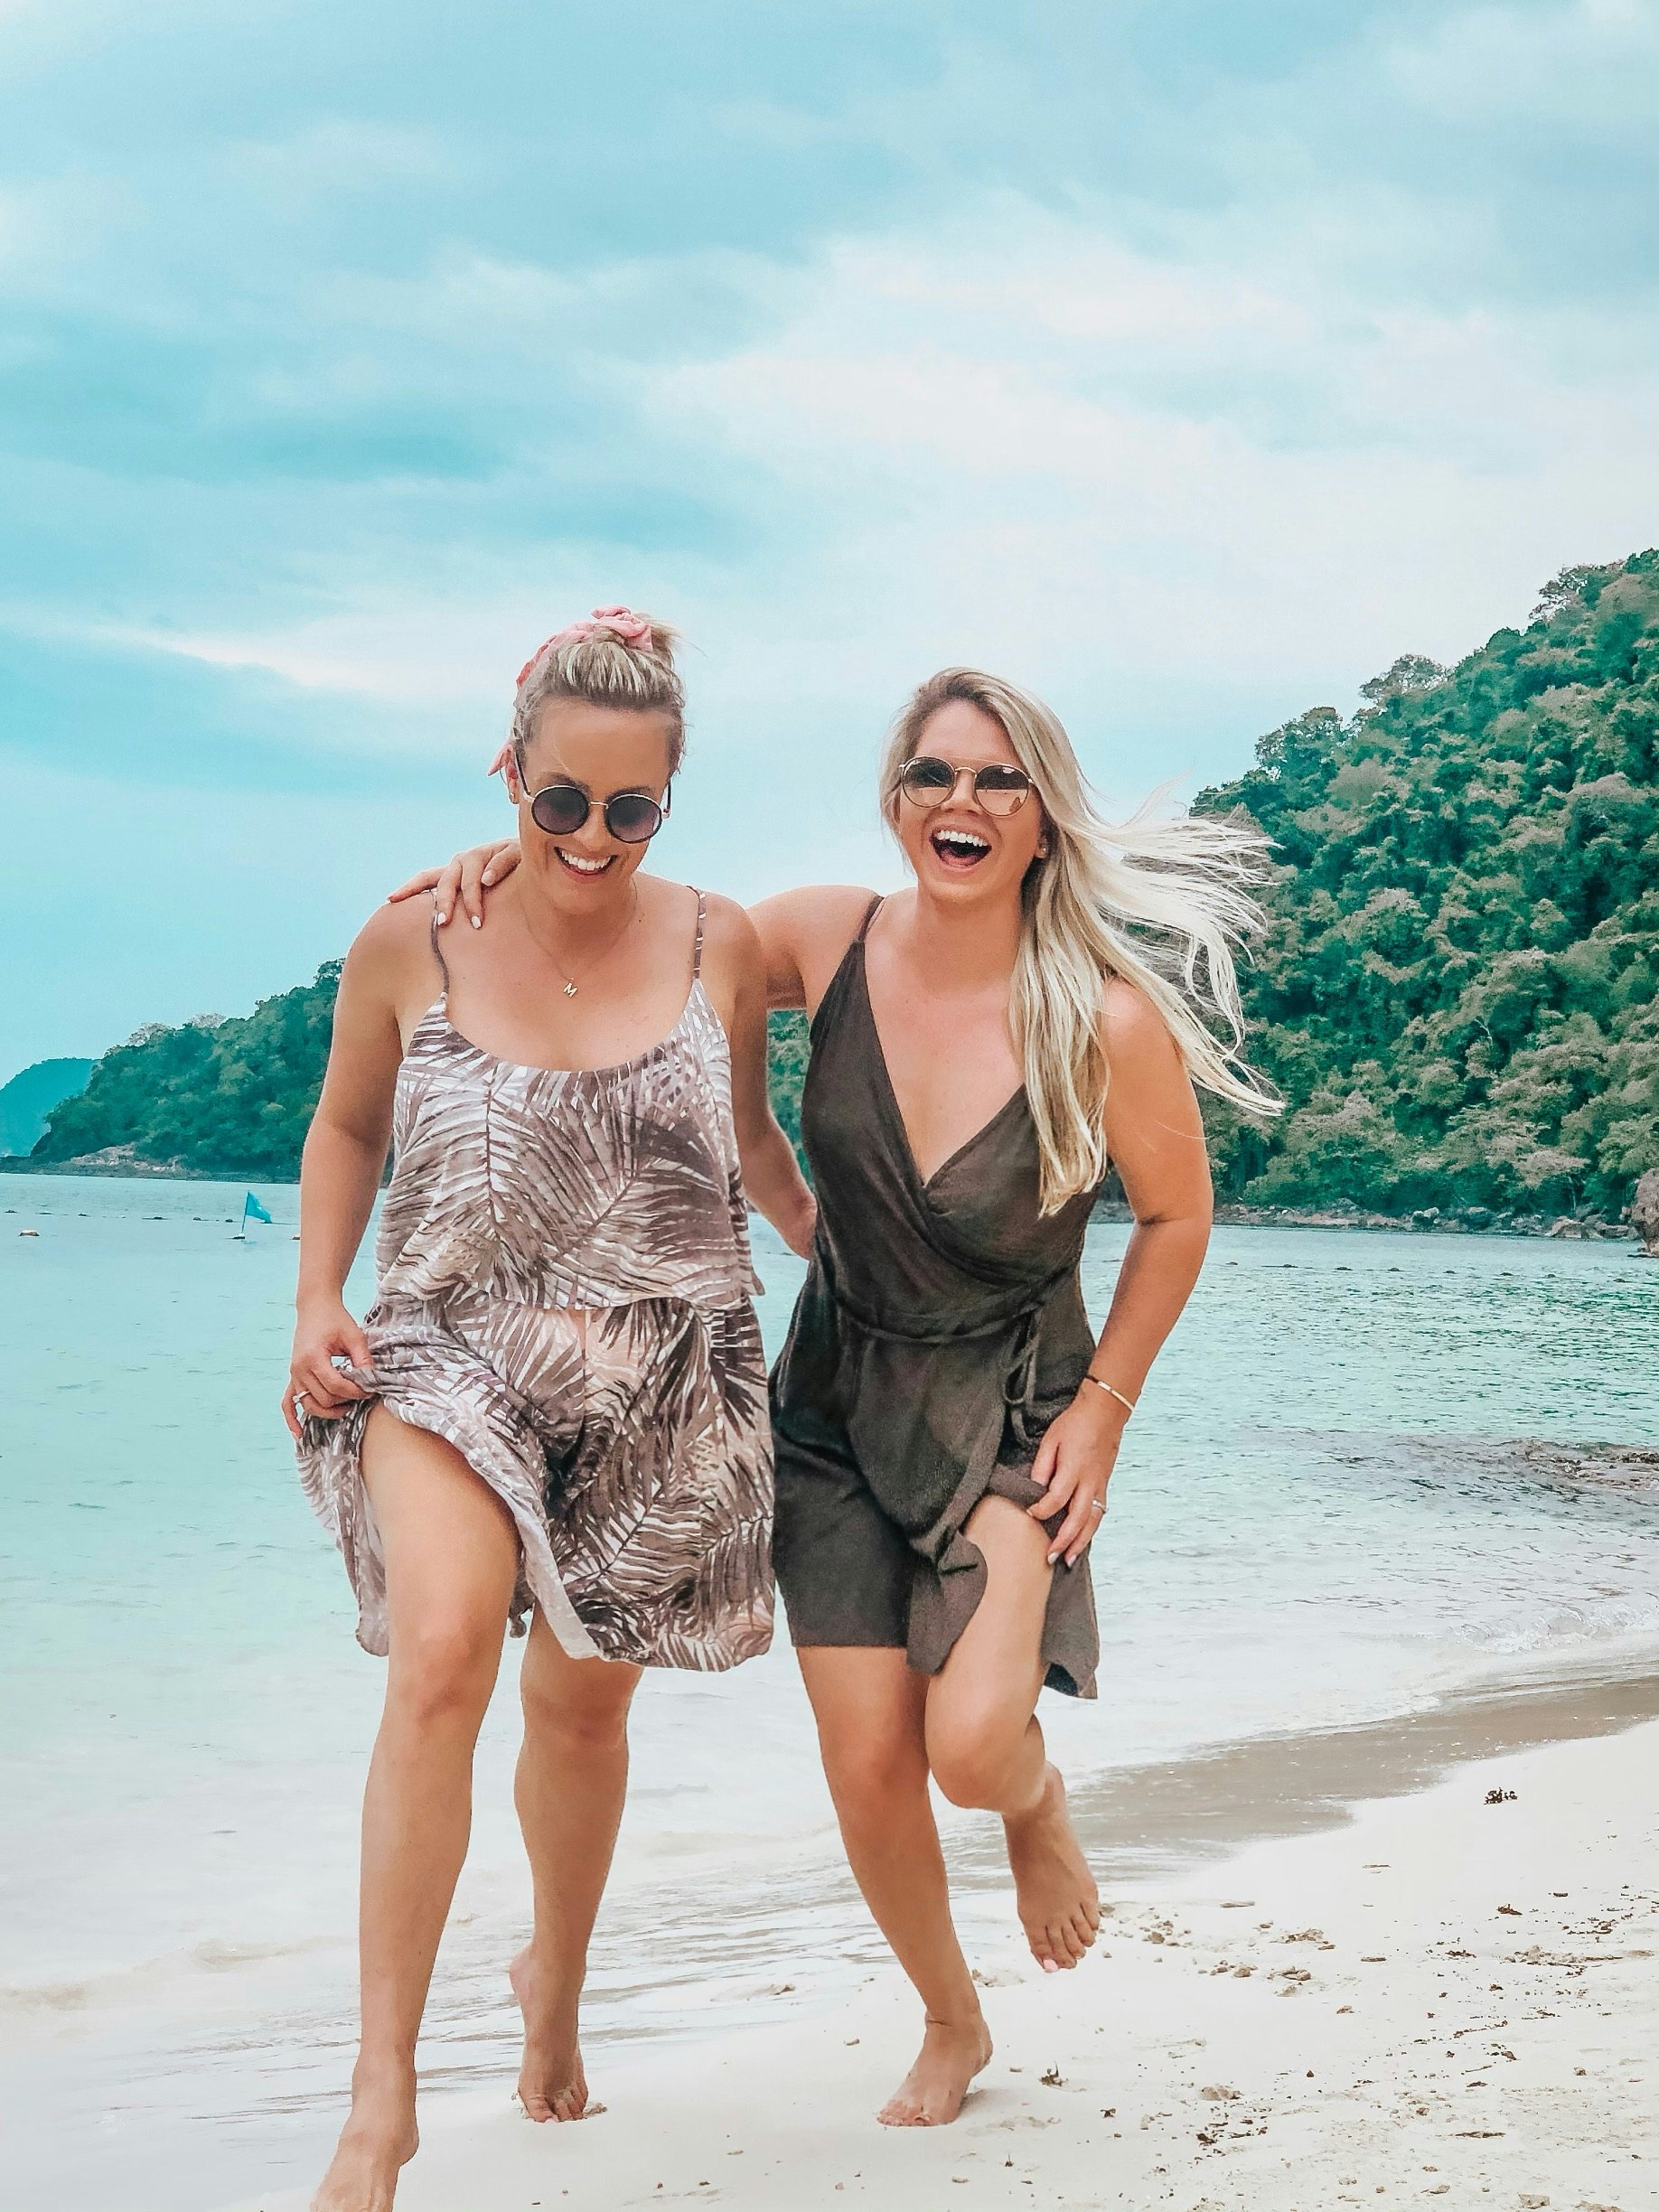 Whitney and Megan smiling and laughing on the beach of a tropical island in Thailand's Ang Thong Marine National Park.